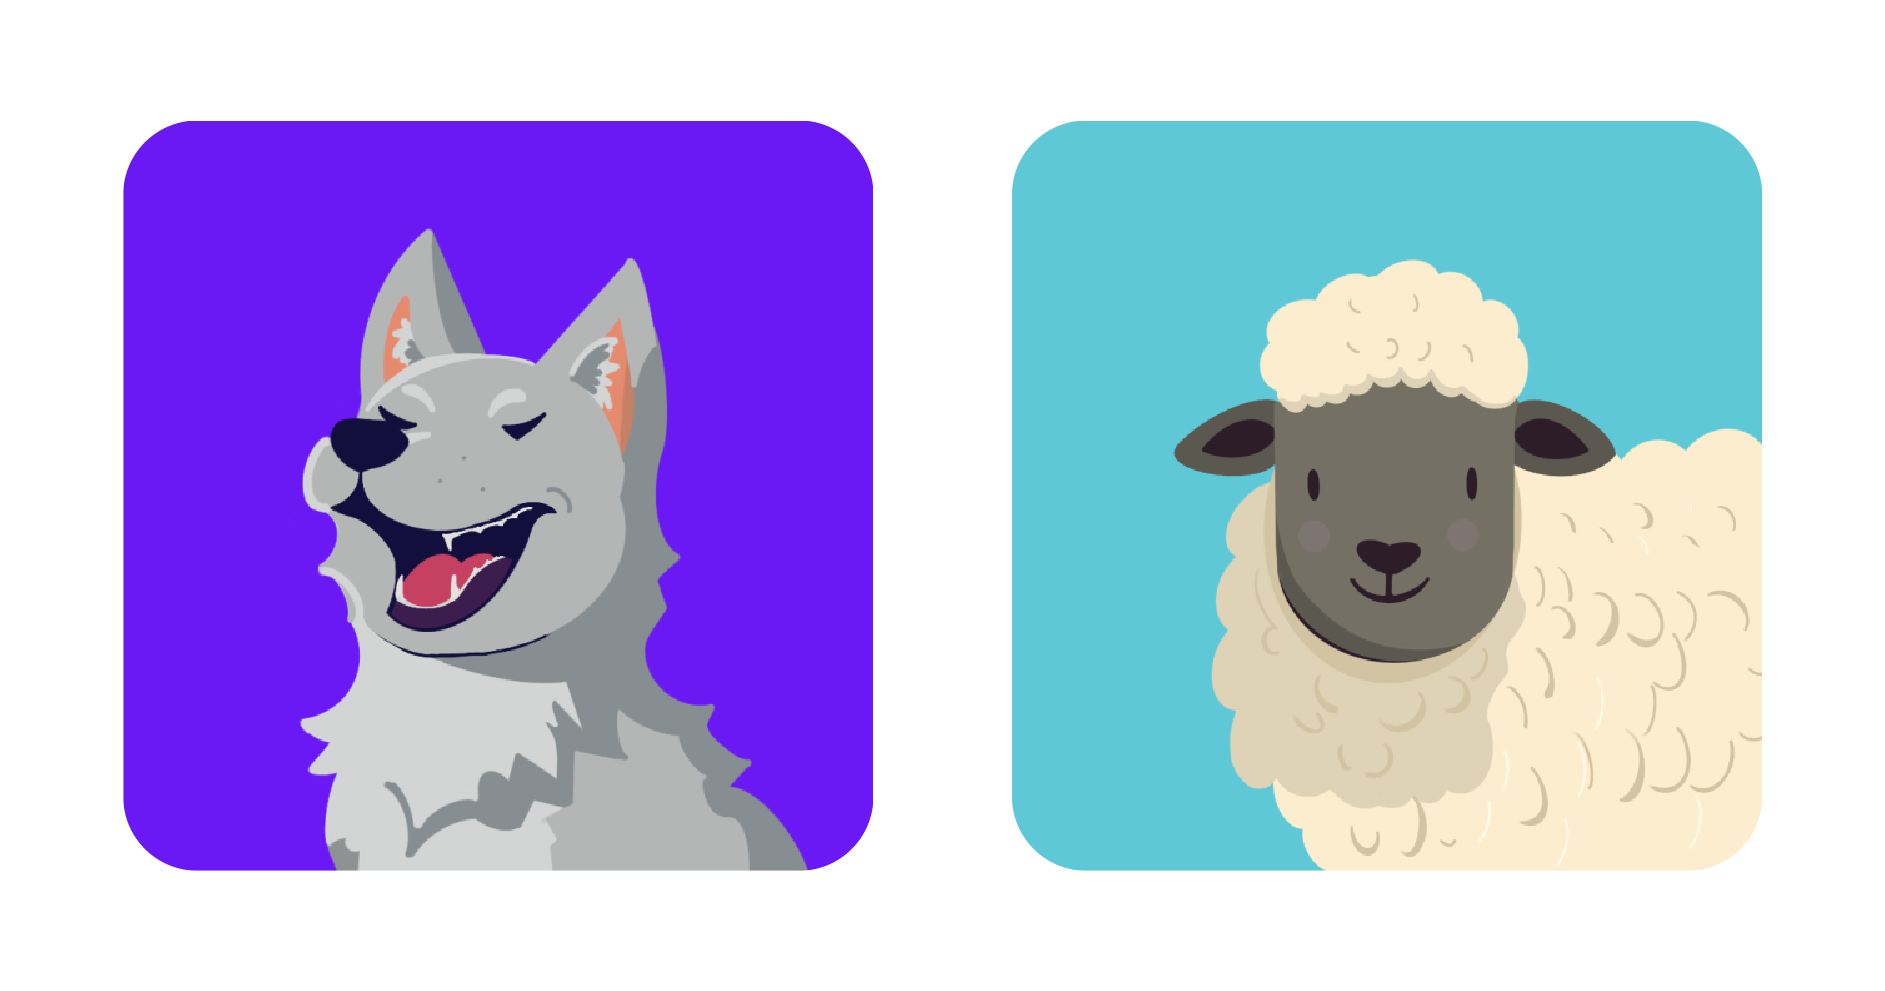 Wolves and Sheep